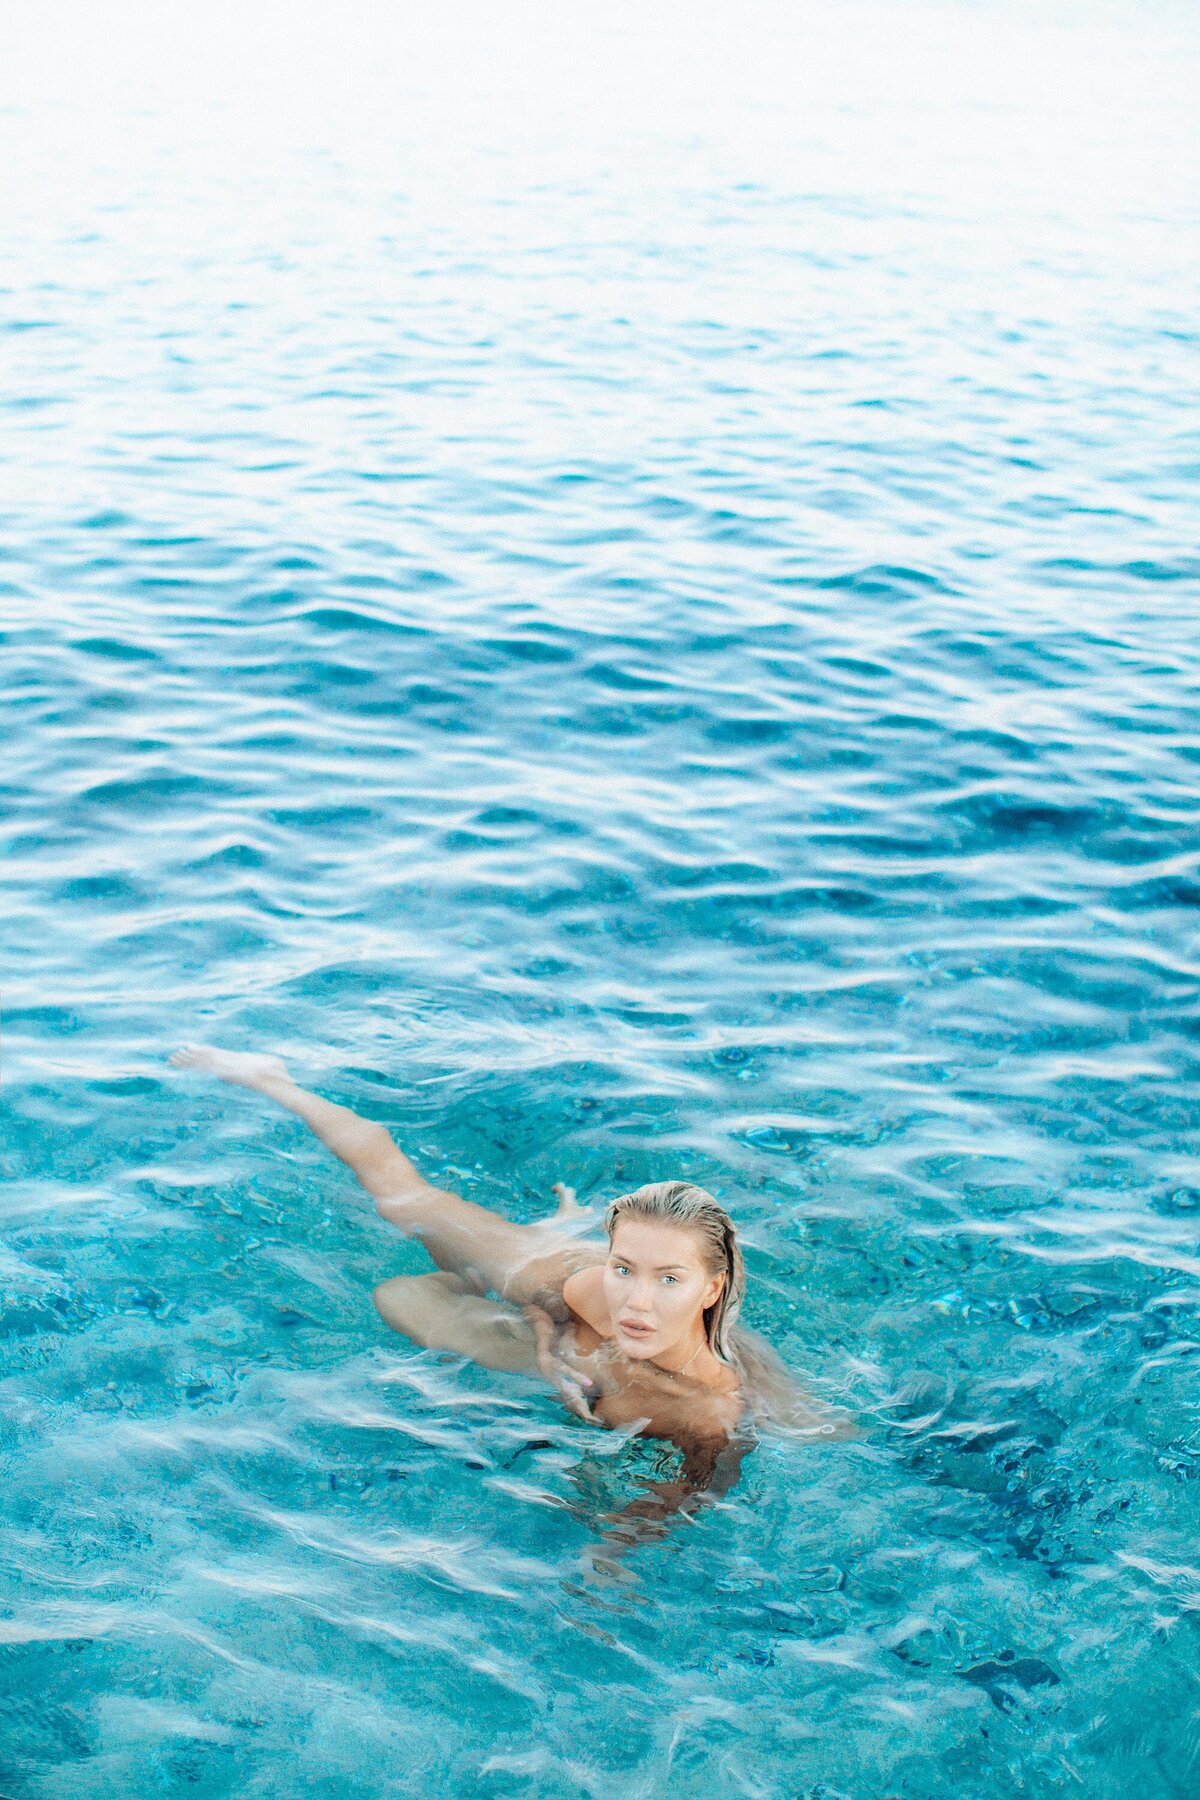 Boudoir photo of a blonde woman swimming in the beautiful blue waters of Maui